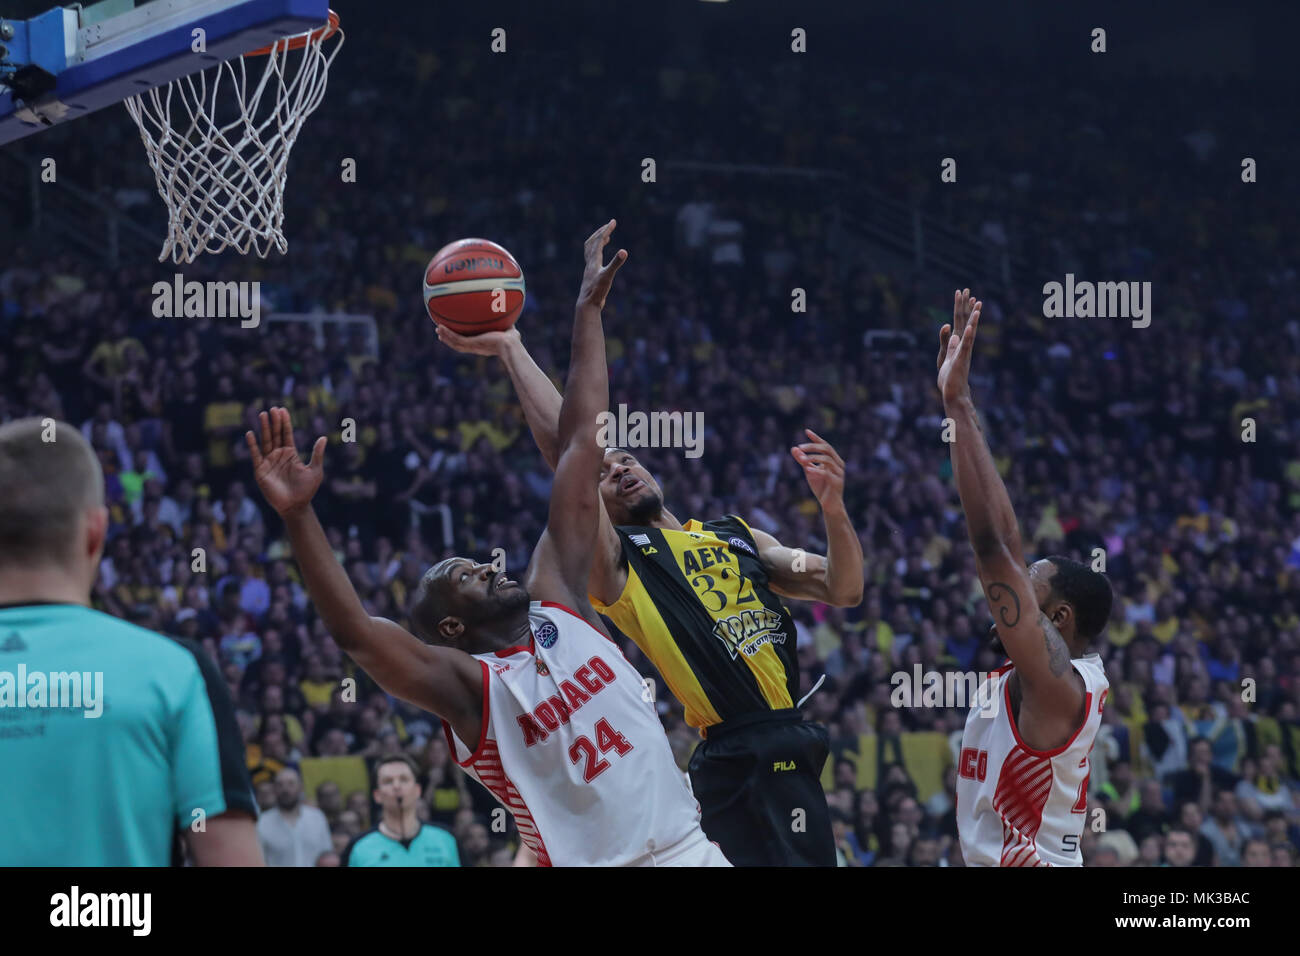 180507) -- ATHENS, May 7, 2018 (Xinhua) -- Hunter Vins (C) of AEK Athens  vies with Traore Ali (L) and Cooper D.J. of AS Monaco during the final  match of Basketball Champions